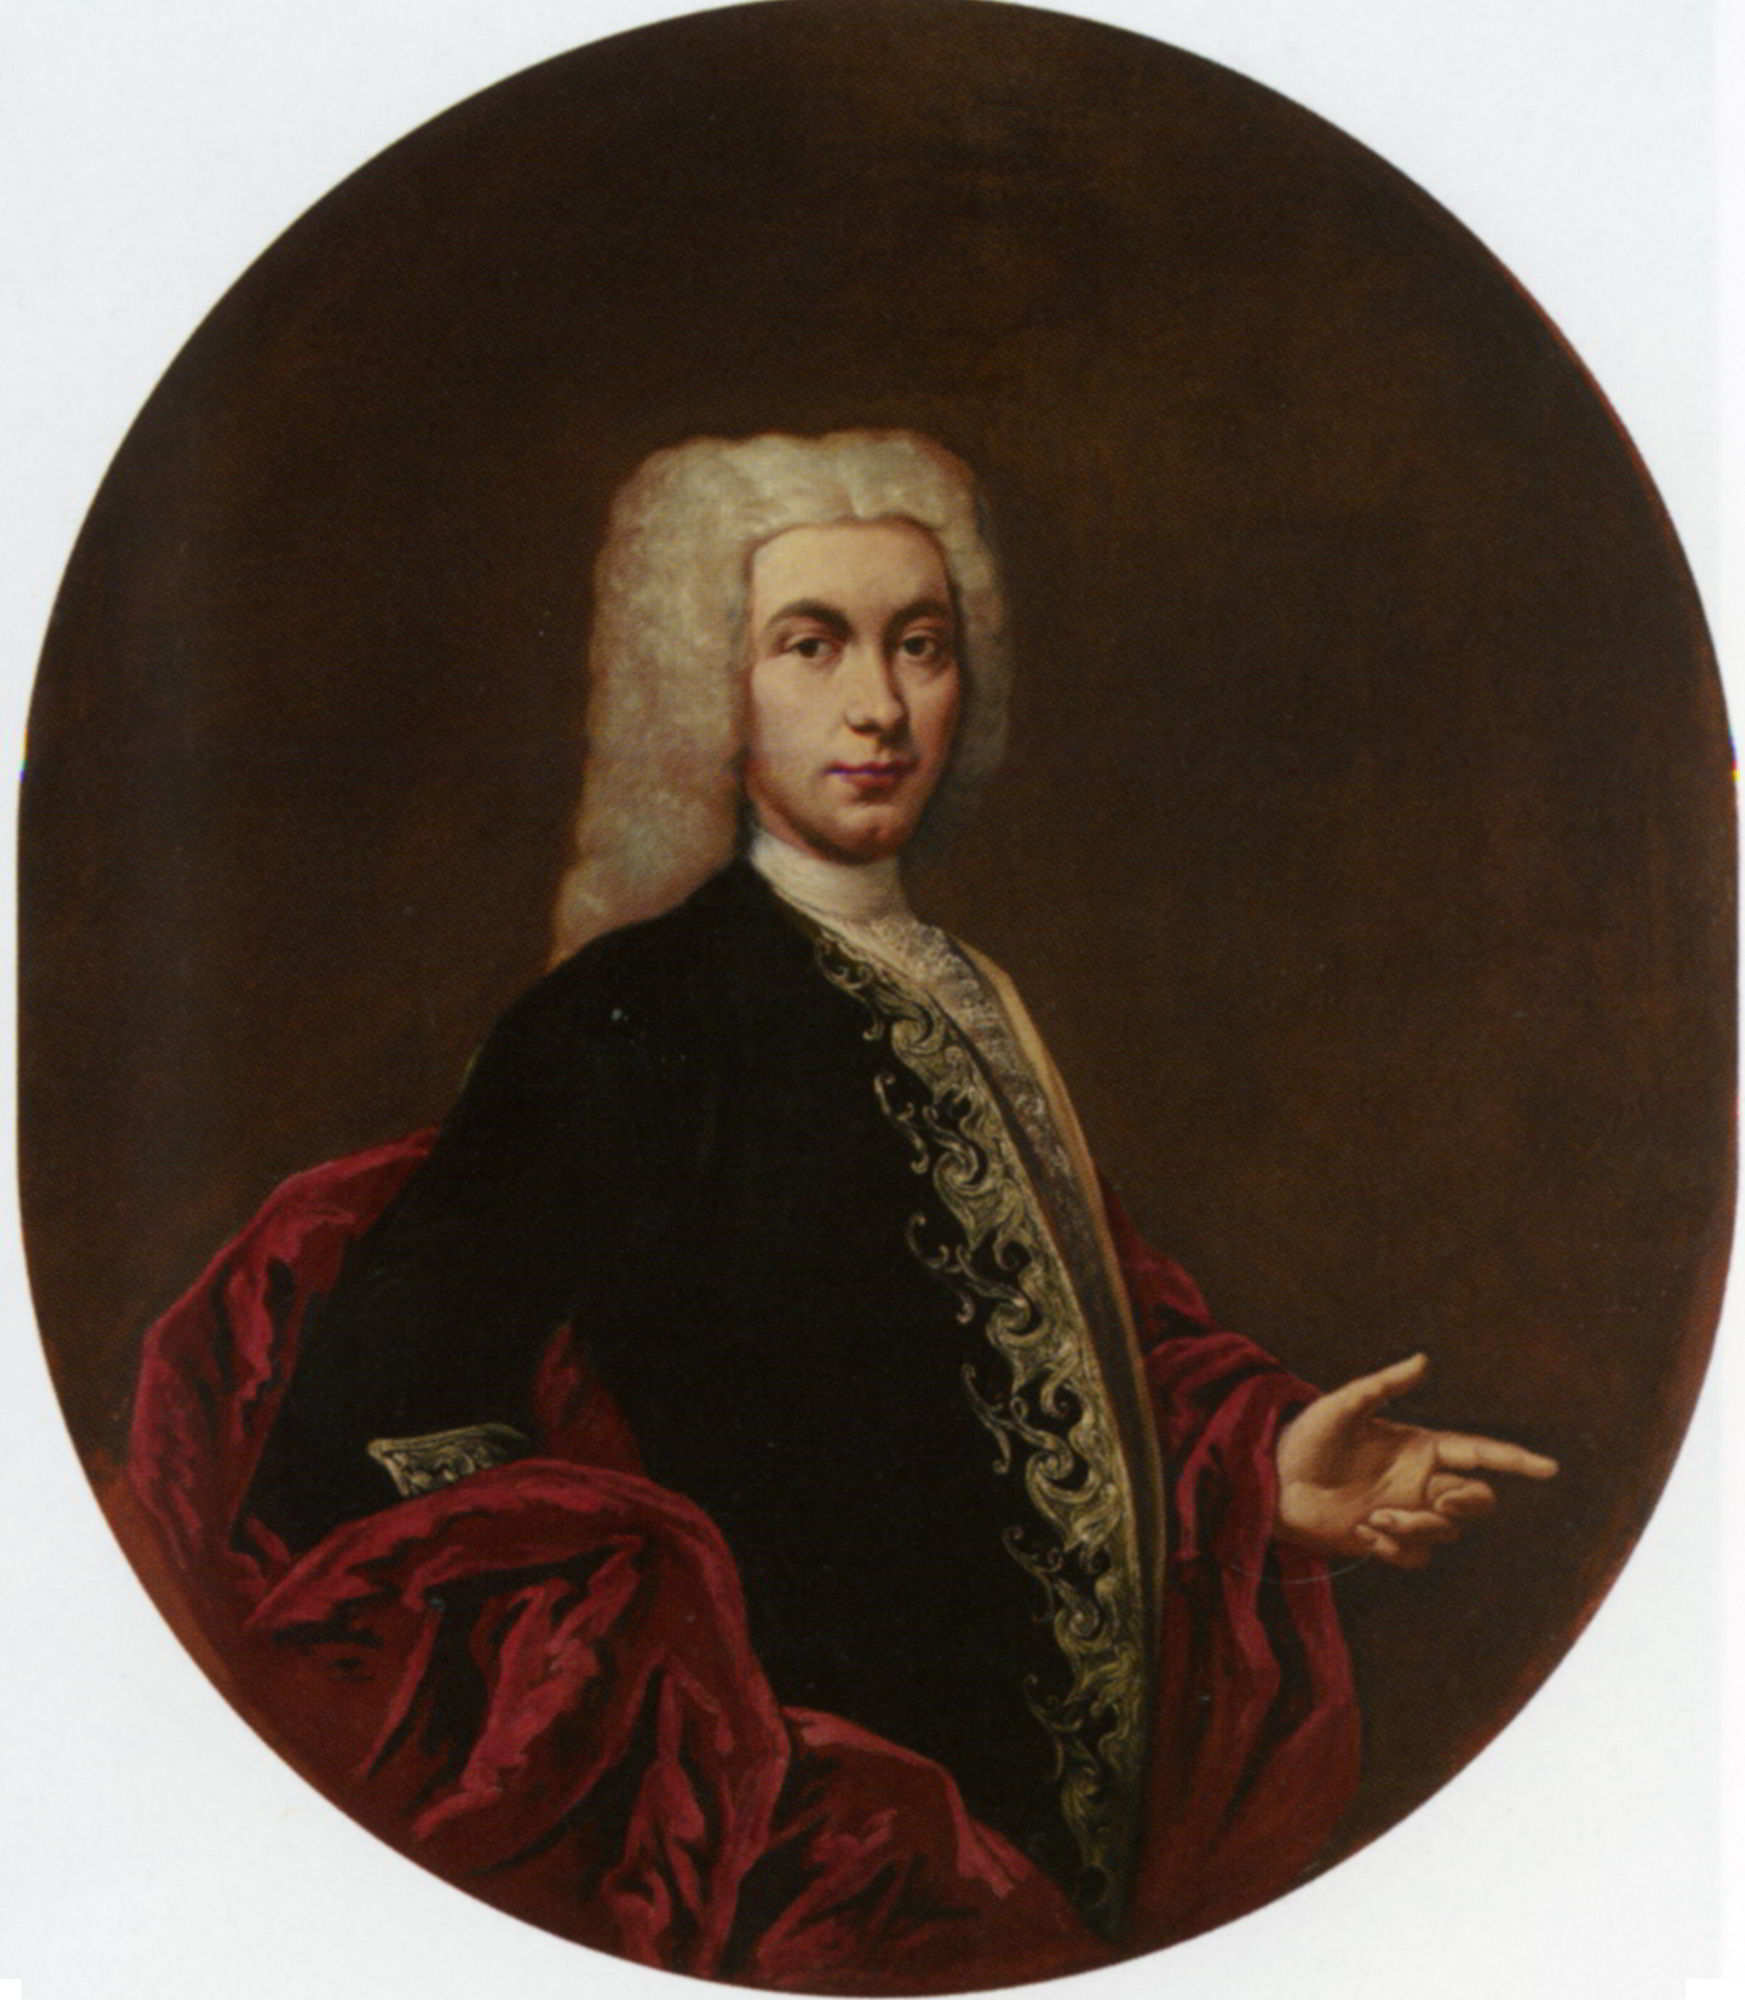 Portrait of a Gentleman Half Length Wearing an Embroidered Doublet by Giacomo Ceruti